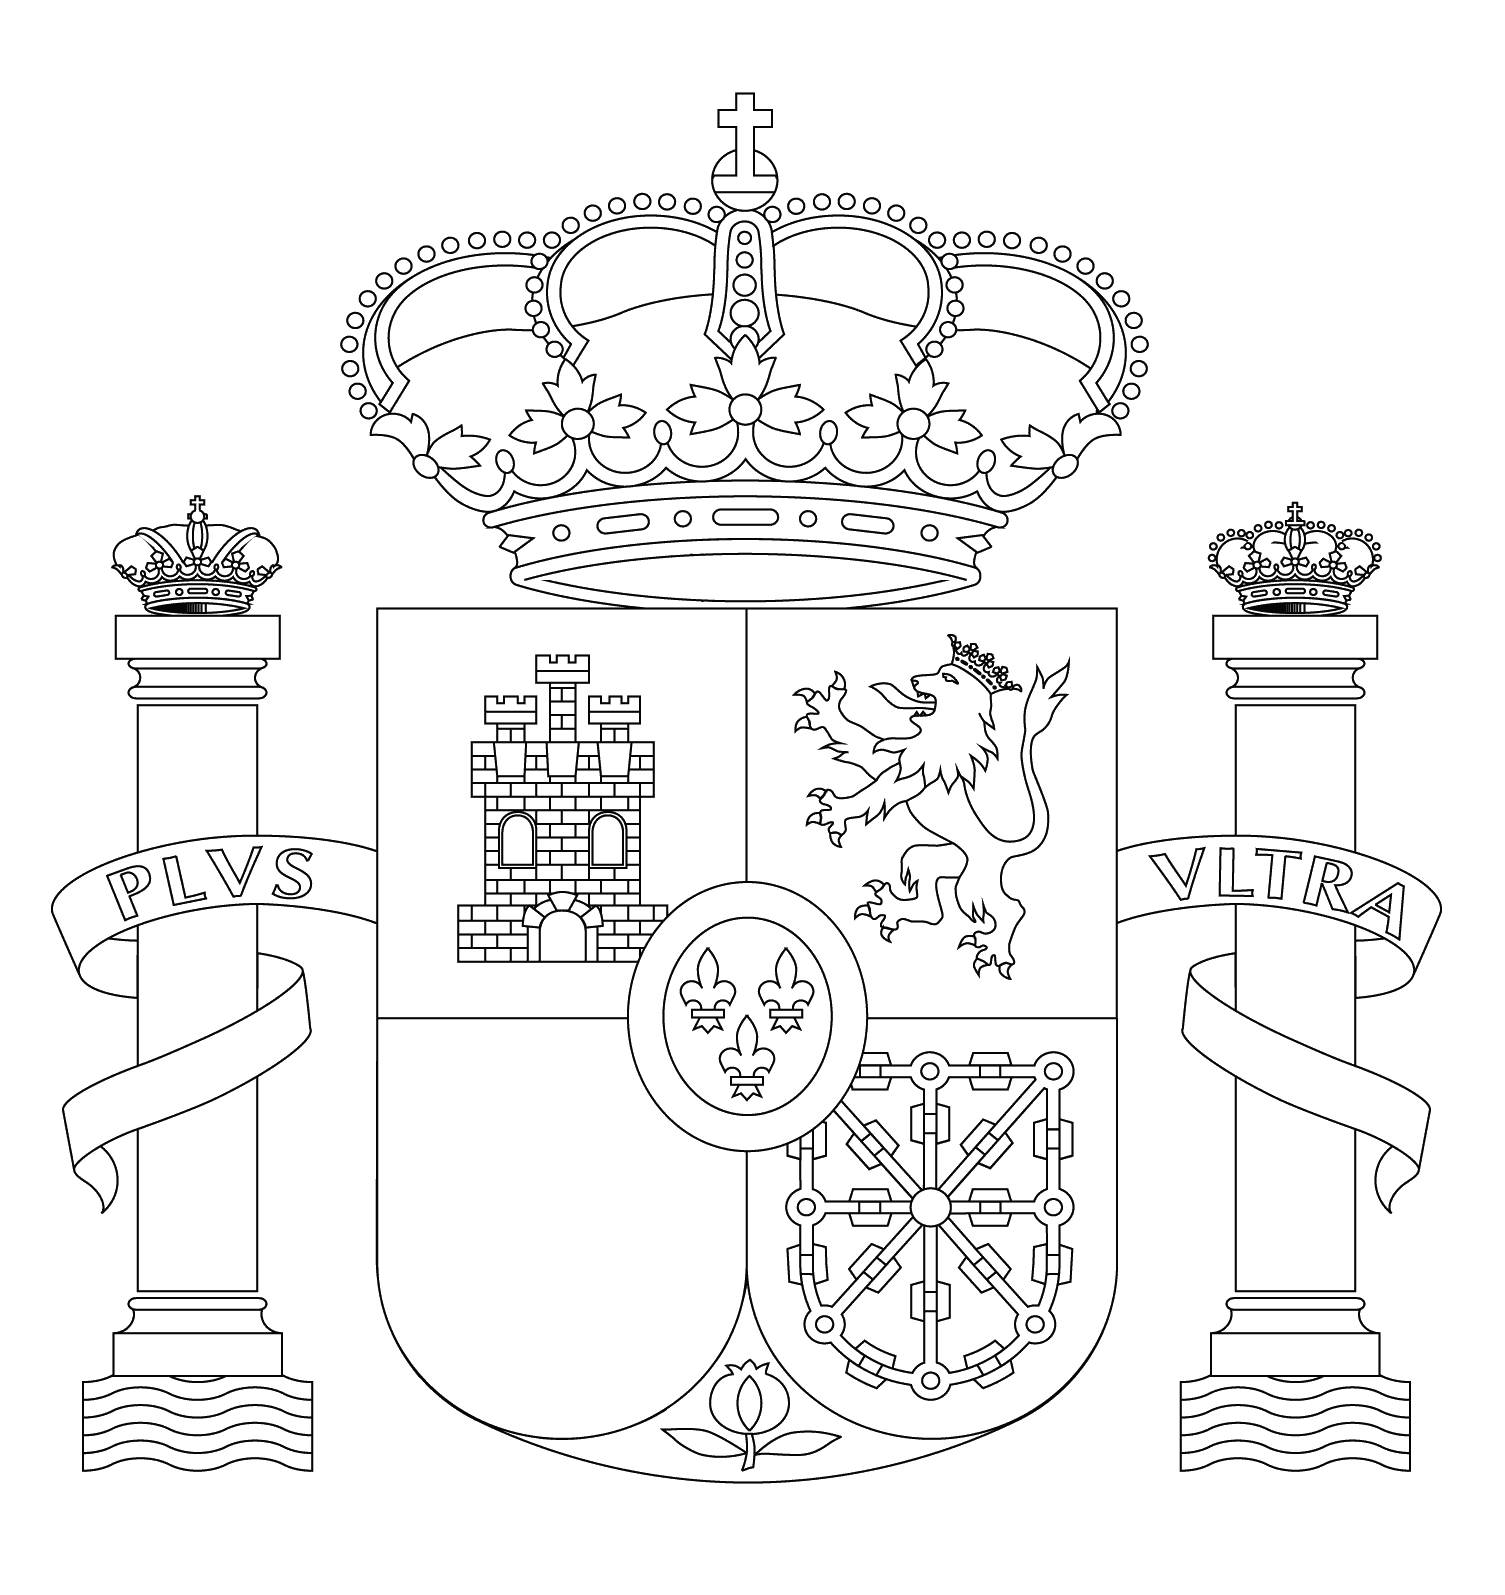 Coat of arms of spain